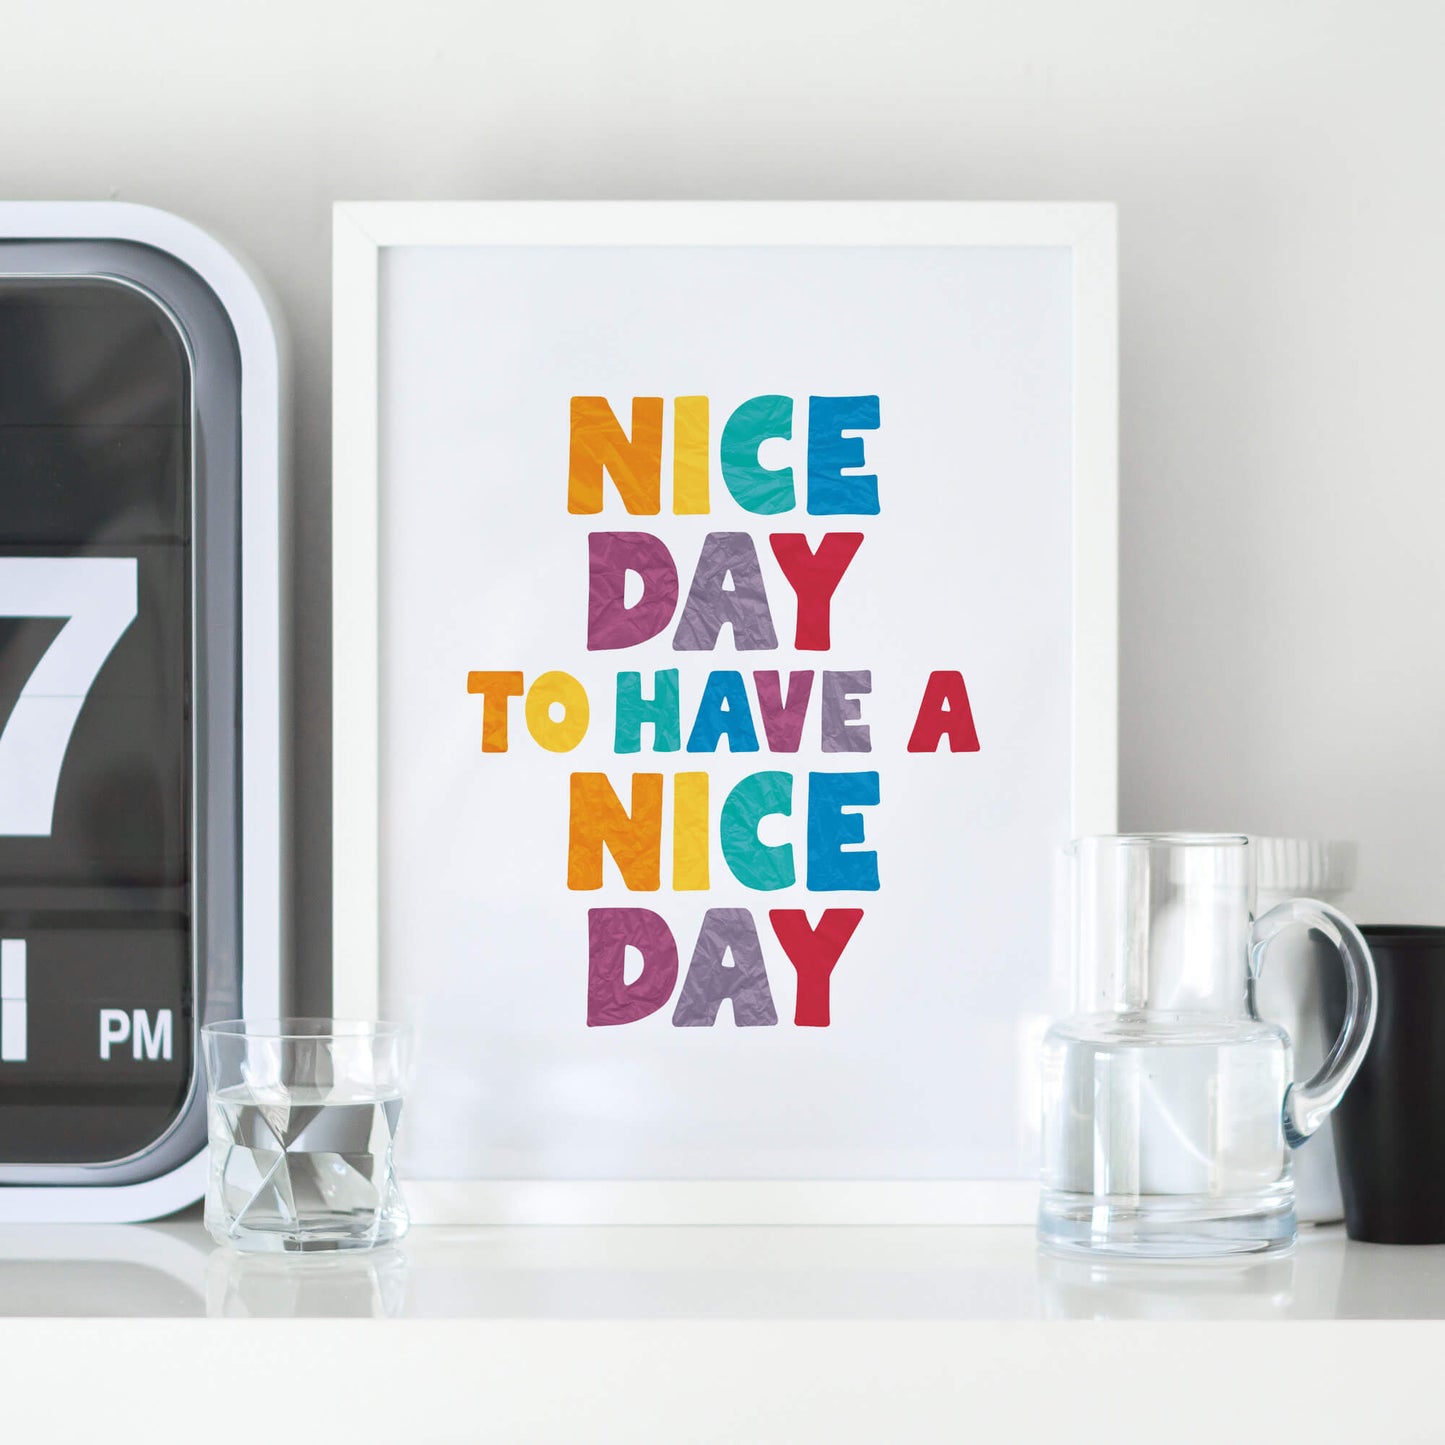 Nice Day To Have A Nice Day Wall Art by SixElevenCreations. Product Code SEP0509